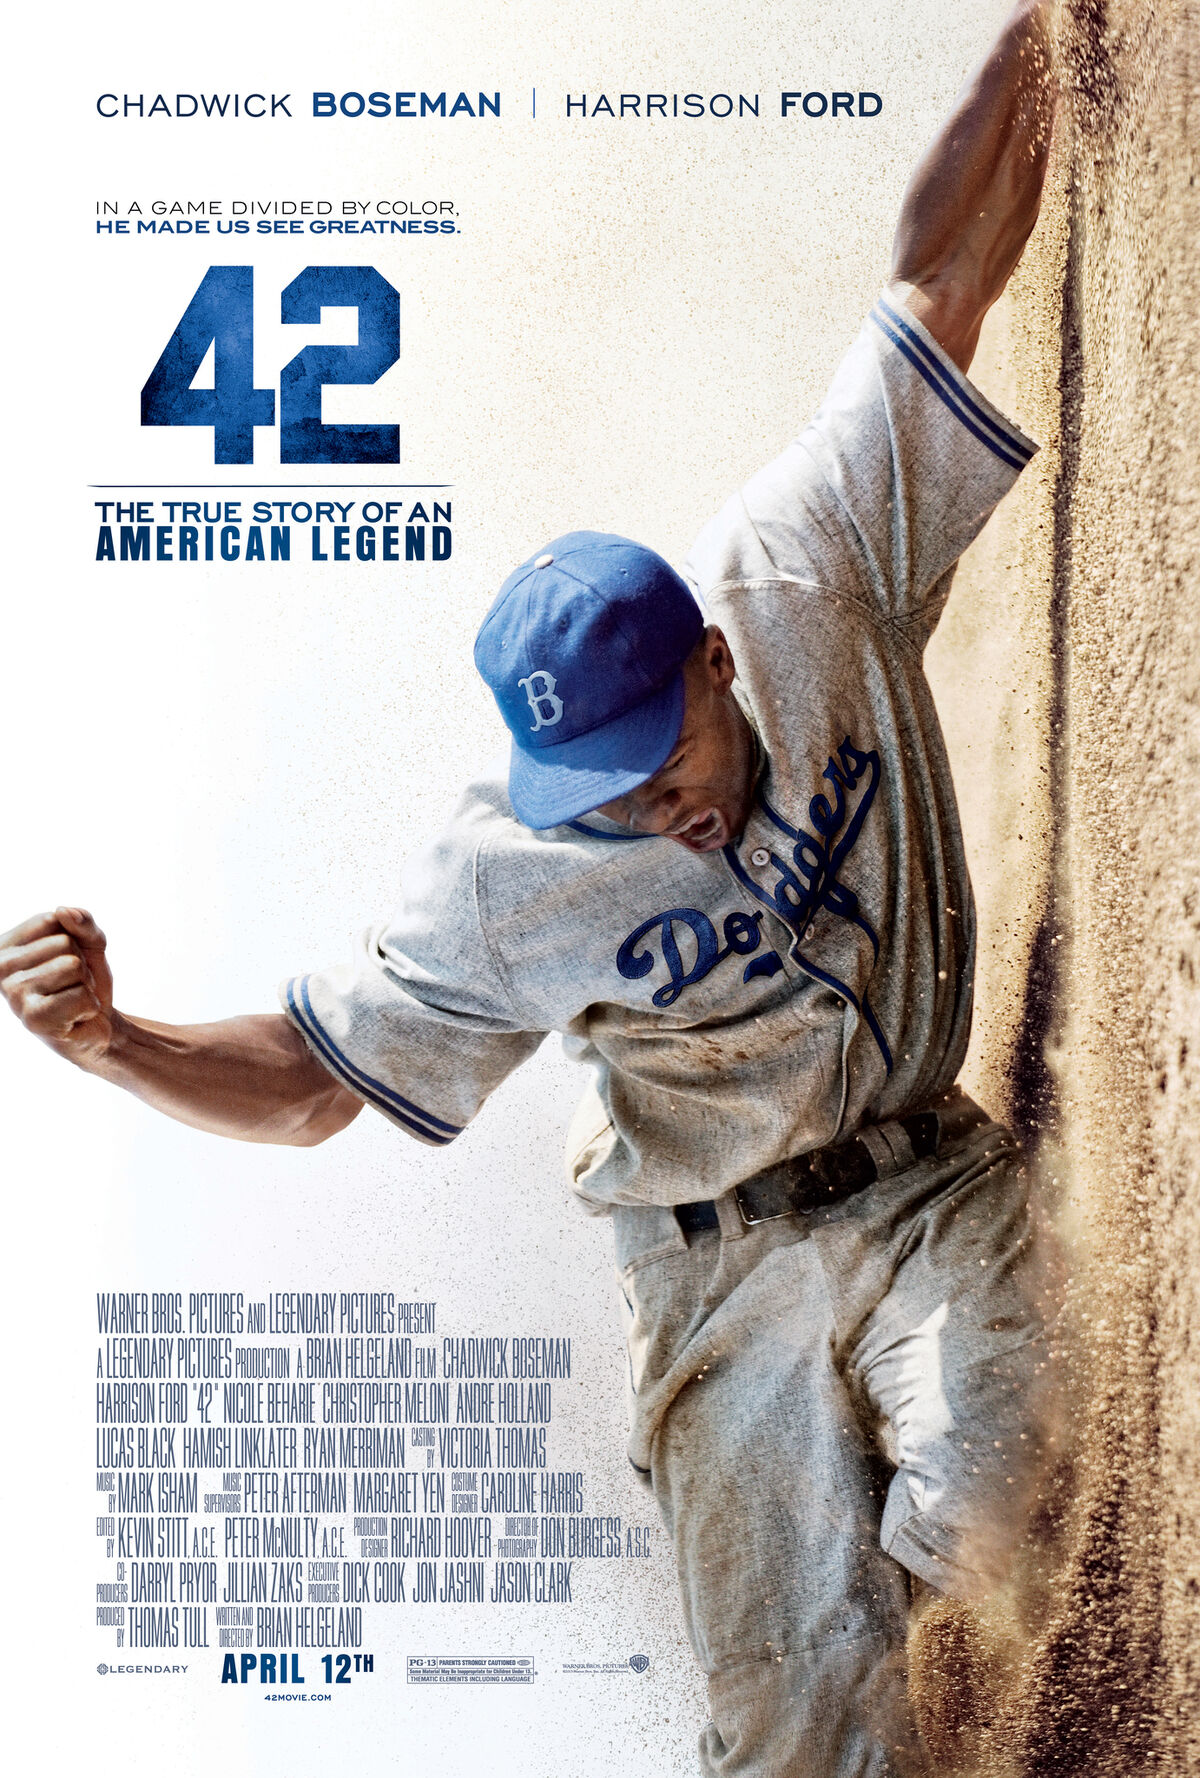 Ryan Merriman hits a home run with role in '42